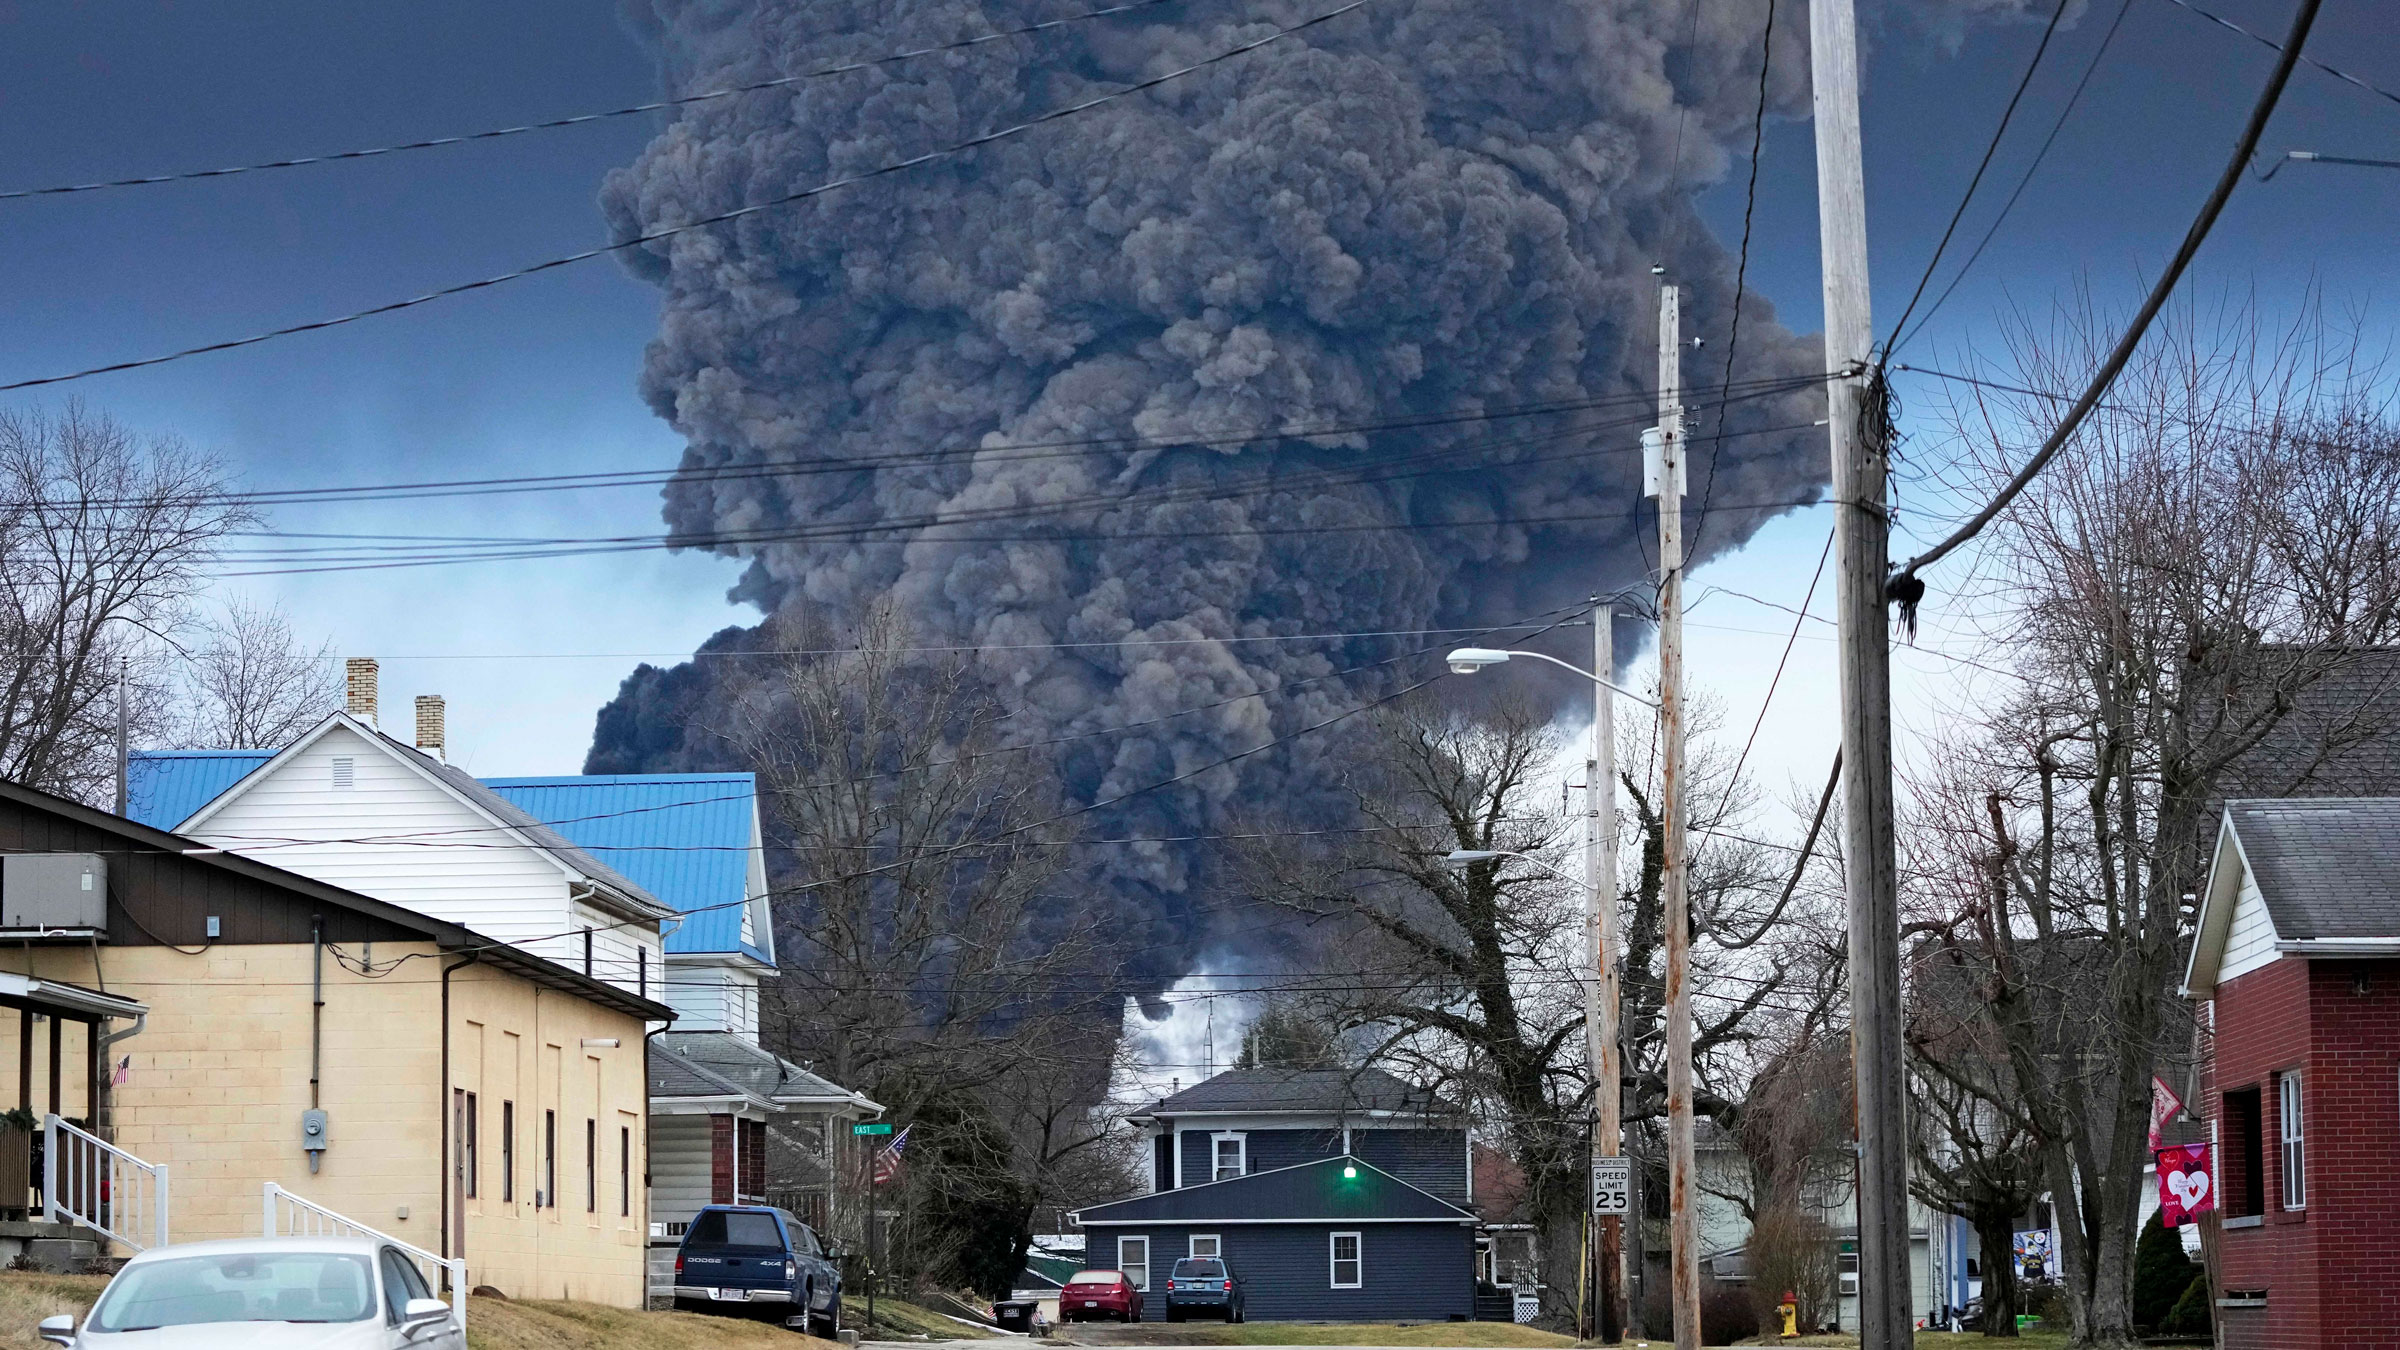 A plume of smoke is seen after a controlled detonation in East Palestine, Ohio, on February 6.